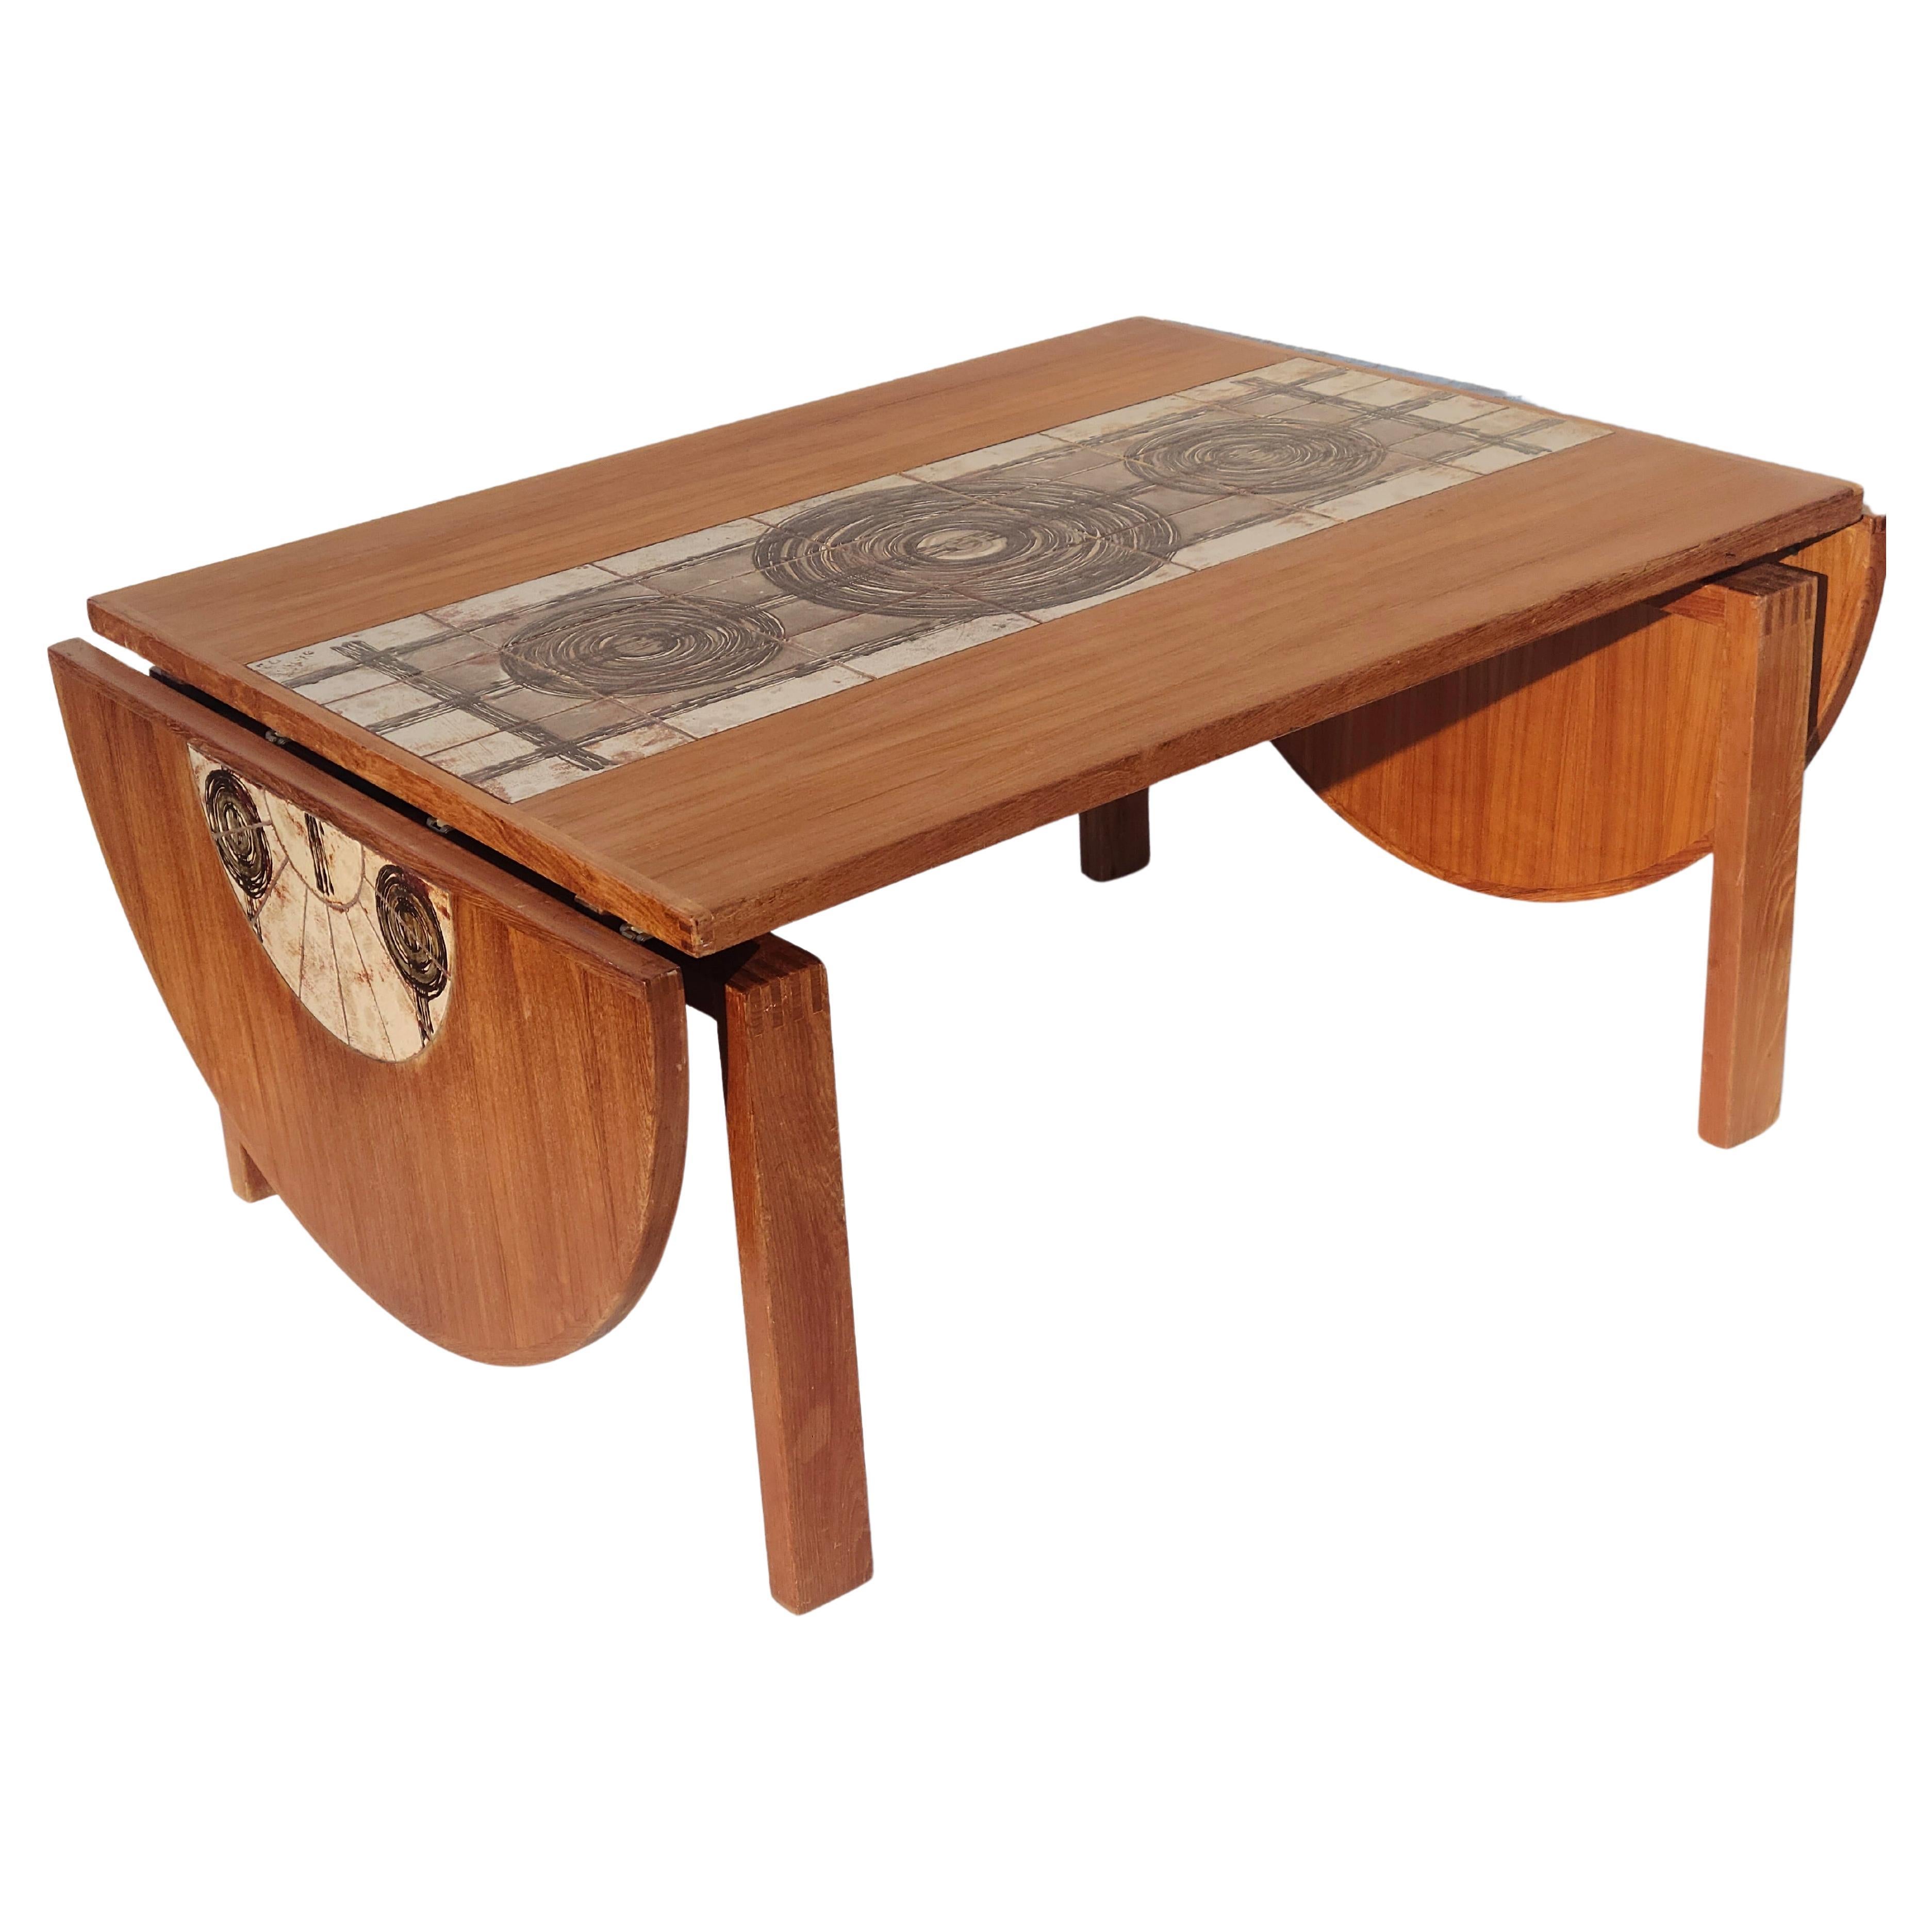 Mid Century Modern Drop Leaf Dining Table.
Branded: A M Made in Denmark
Ceramic Tiles inlaid at top say; Ox Art '73
Teak and Wenge construction.

Please check out our other items for a set of 6 Danish Teak Dining chairs to match.